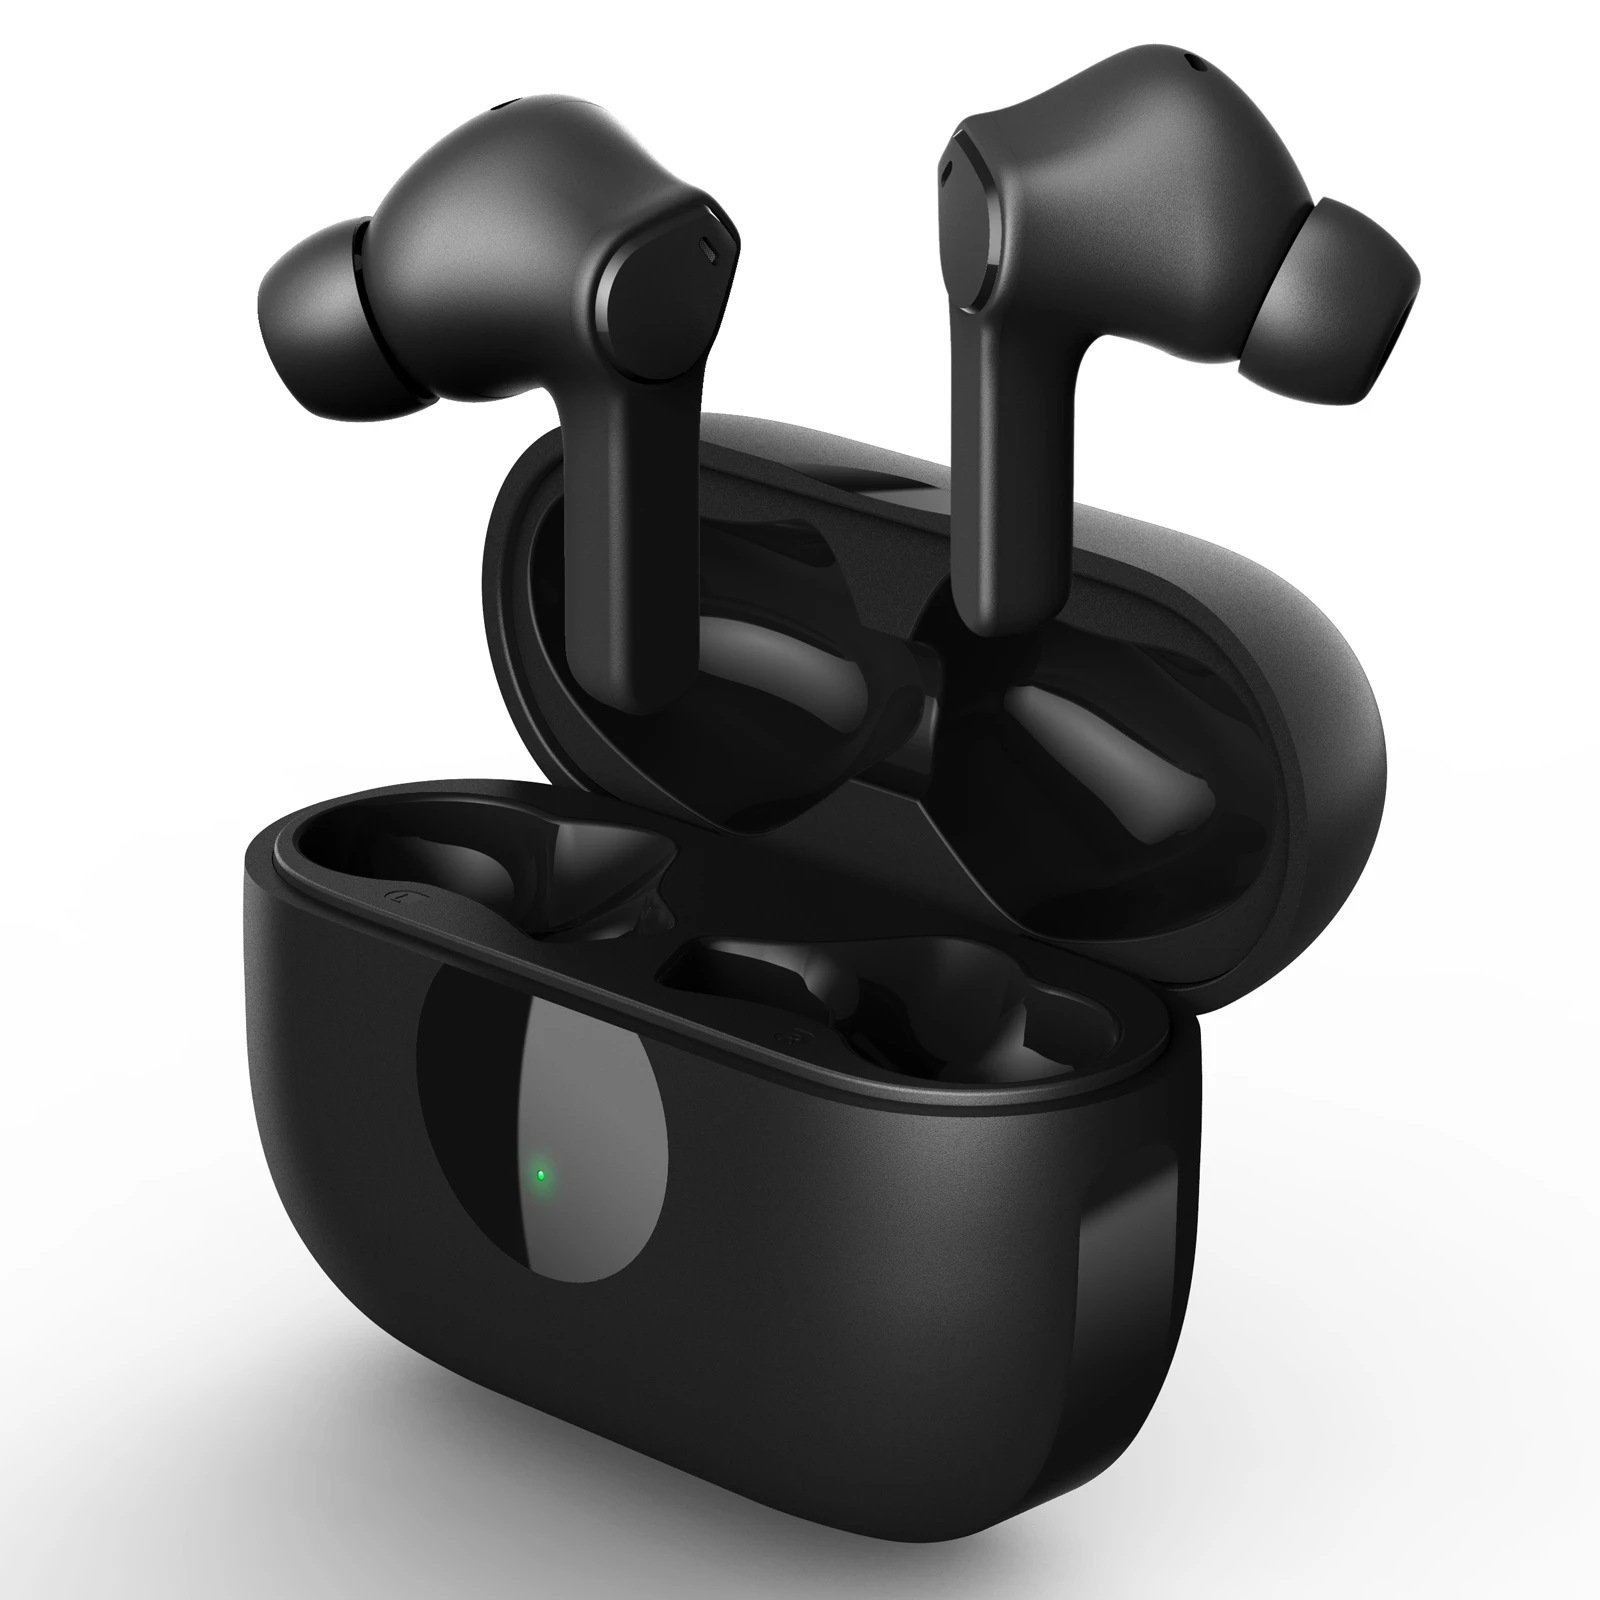 Popular good quality high-end wireless earbuds